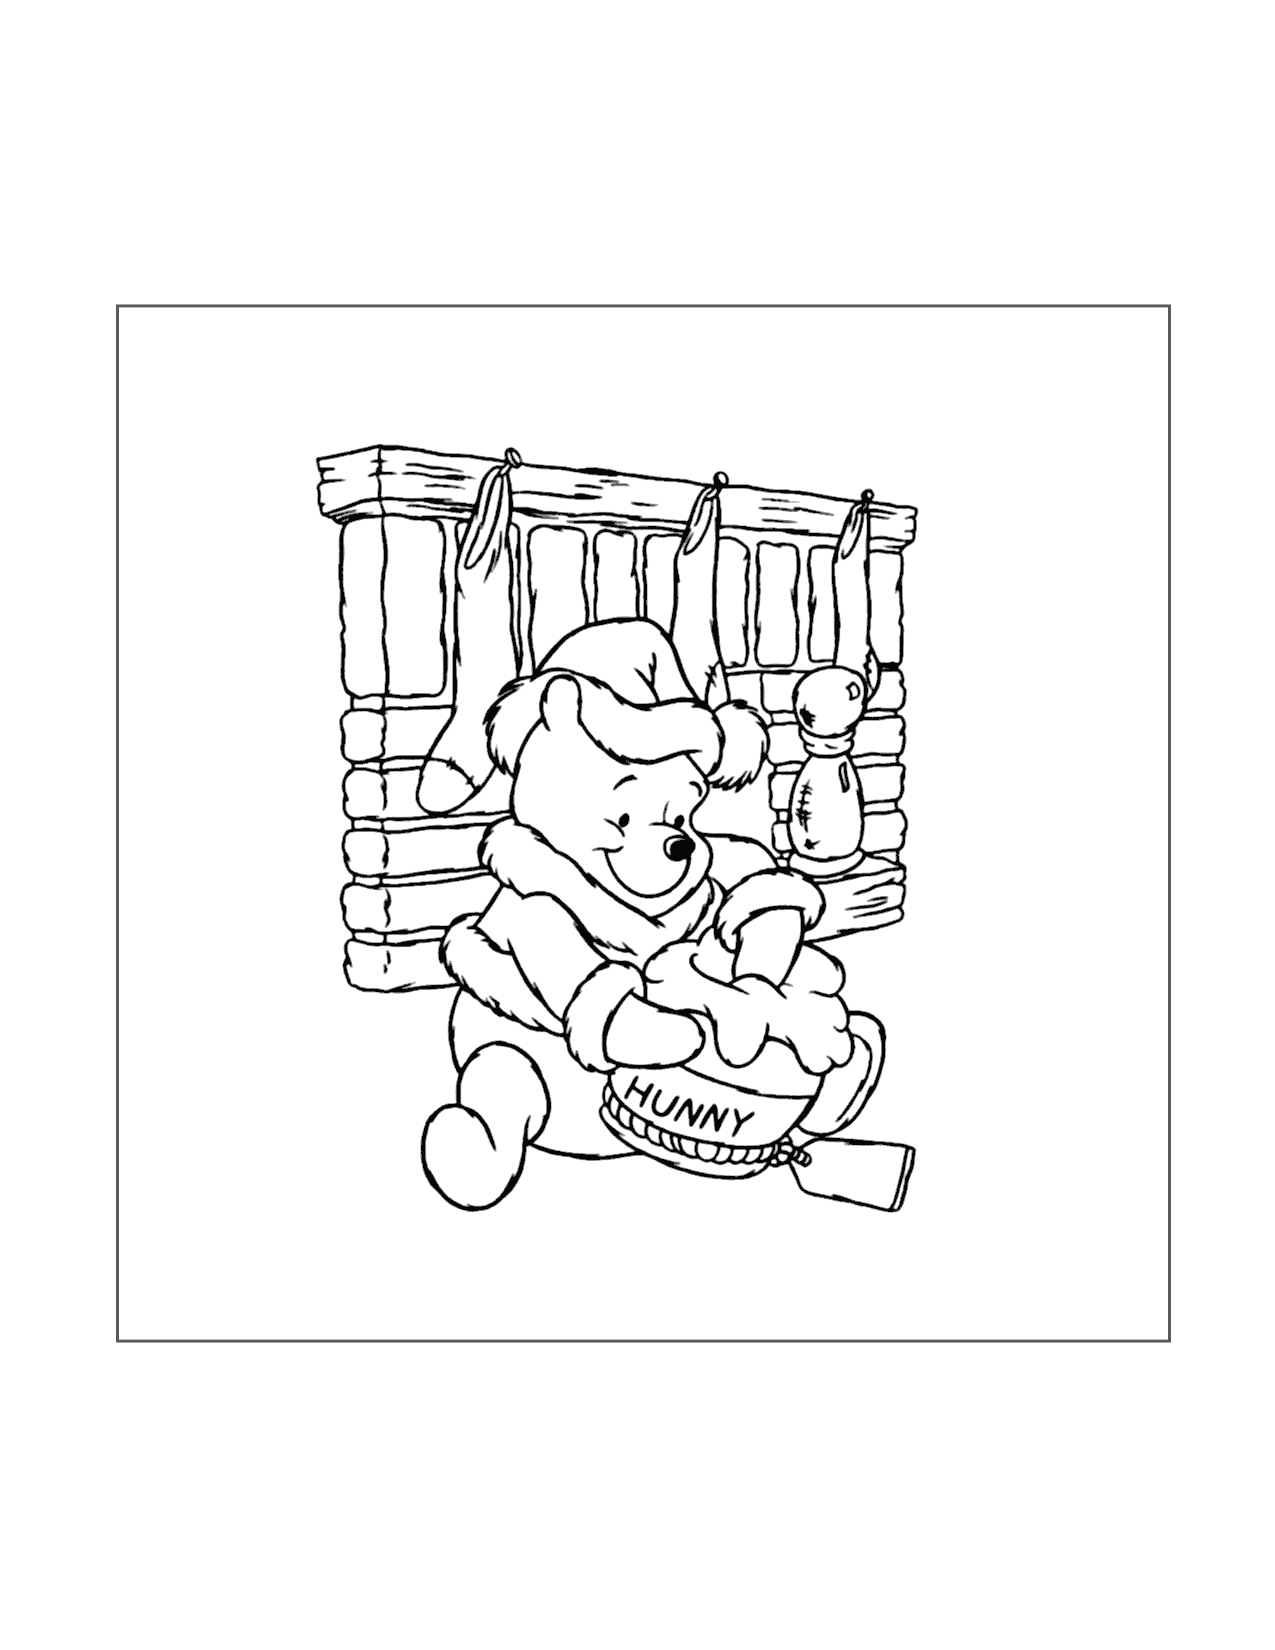 Pooh Bear Hunny For Christmas Coloring Page